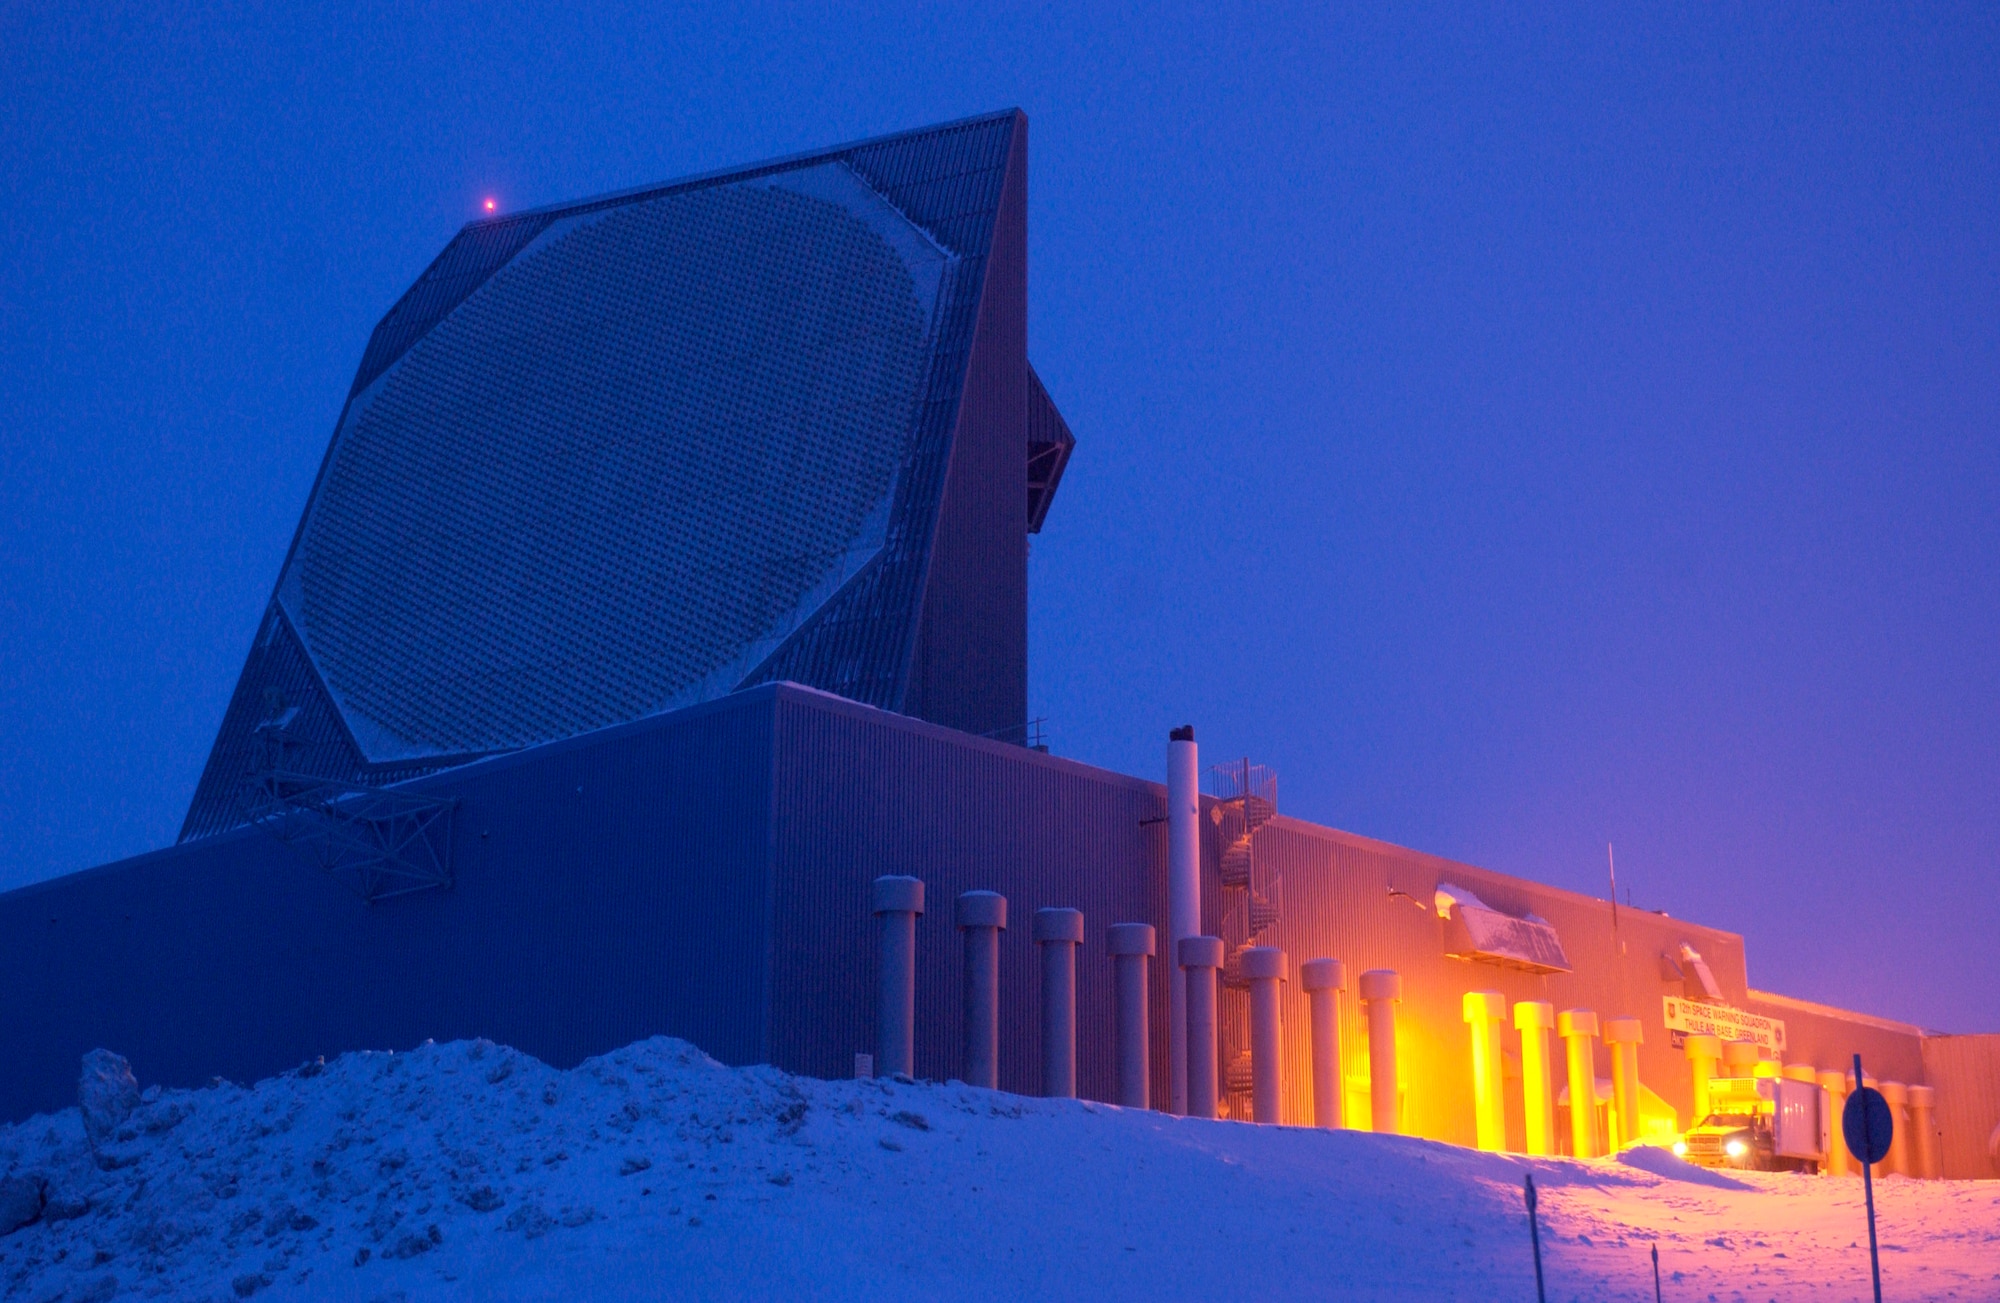 One of the two radar faces of the Ballistic Missile Early Warning System, or BMEWS, site is captured using time-lapsed photography to show the minimal amount of available light during twilight Jan. 25 at Thule Air Base, Greenland. (U.S. Air Force photo/Michael Tolzmann) 
